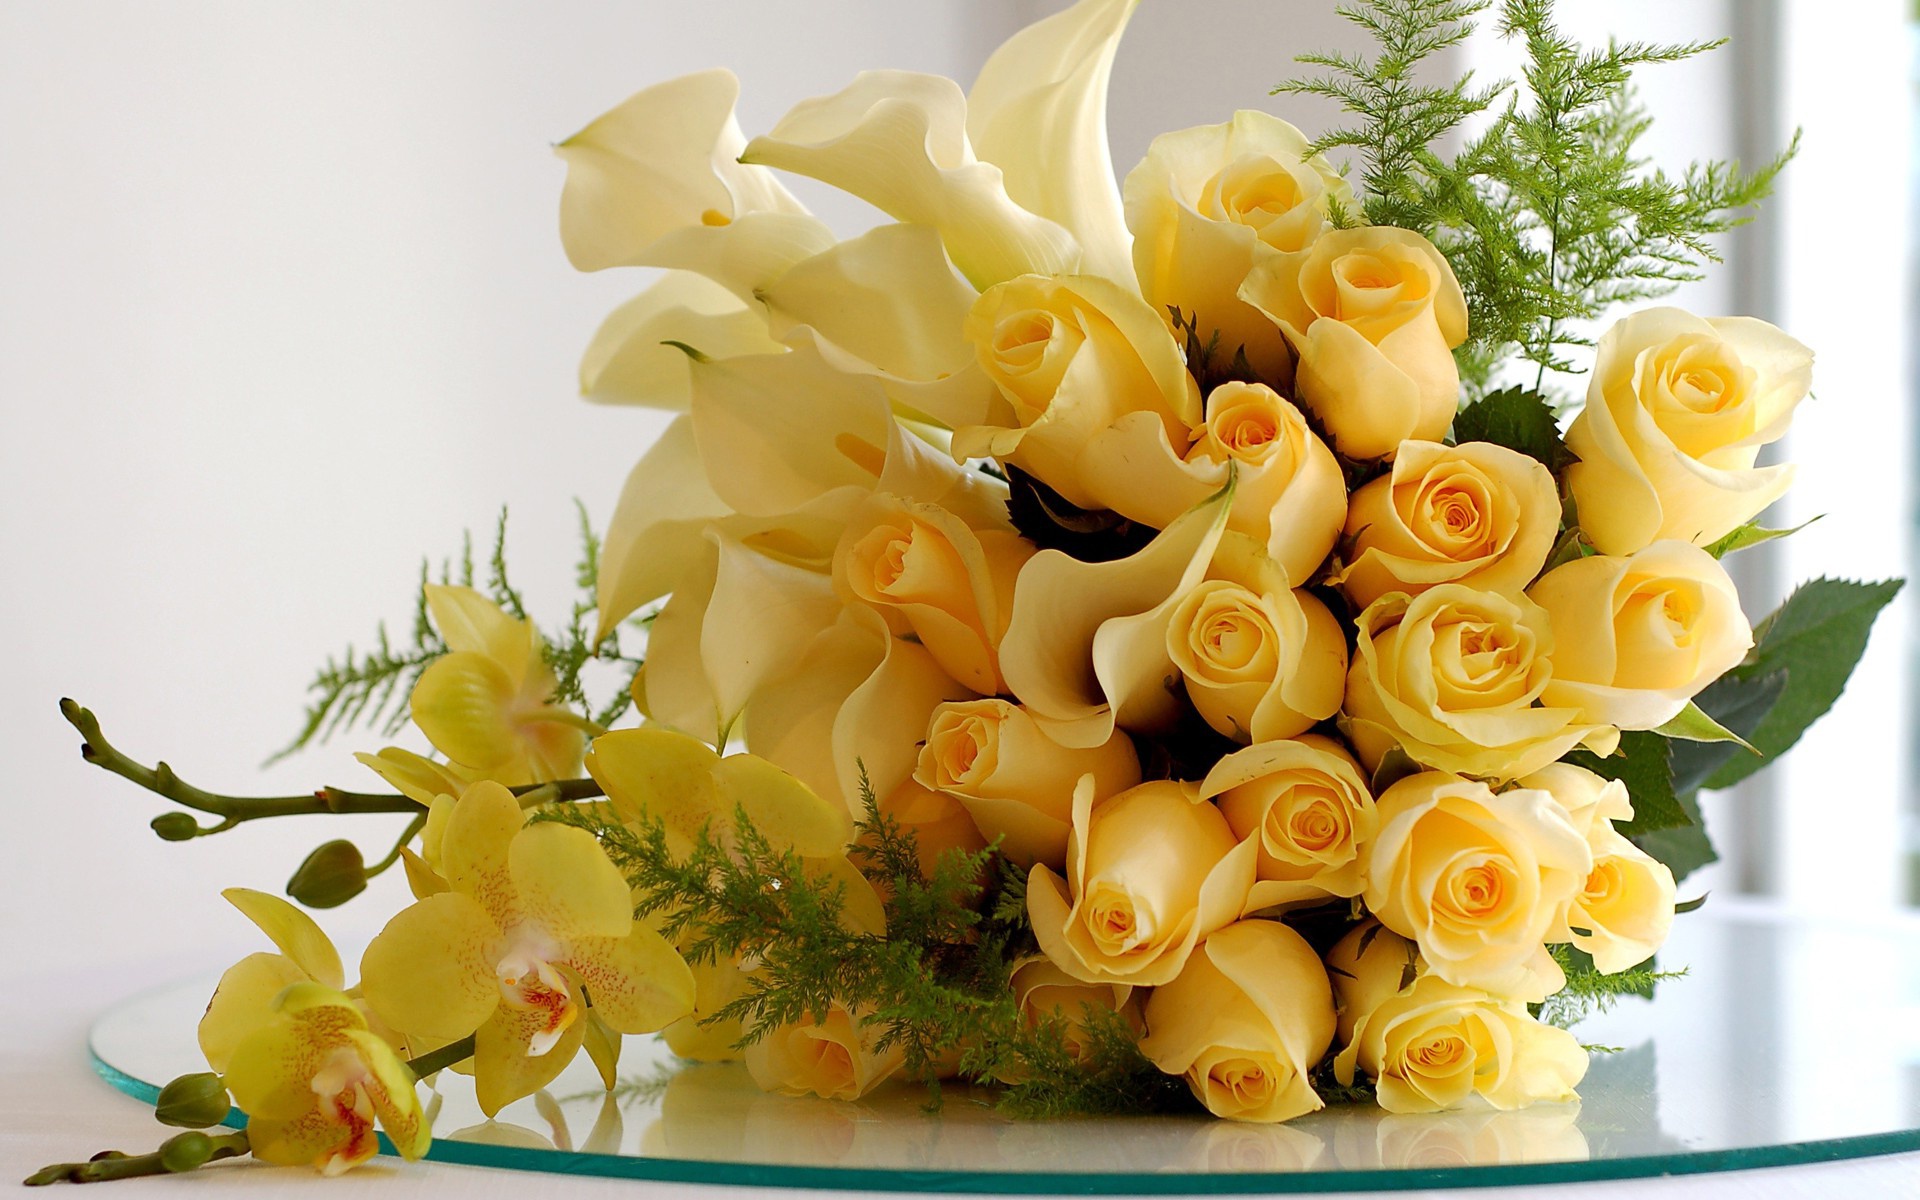 Stunning bouquet of yellow roses